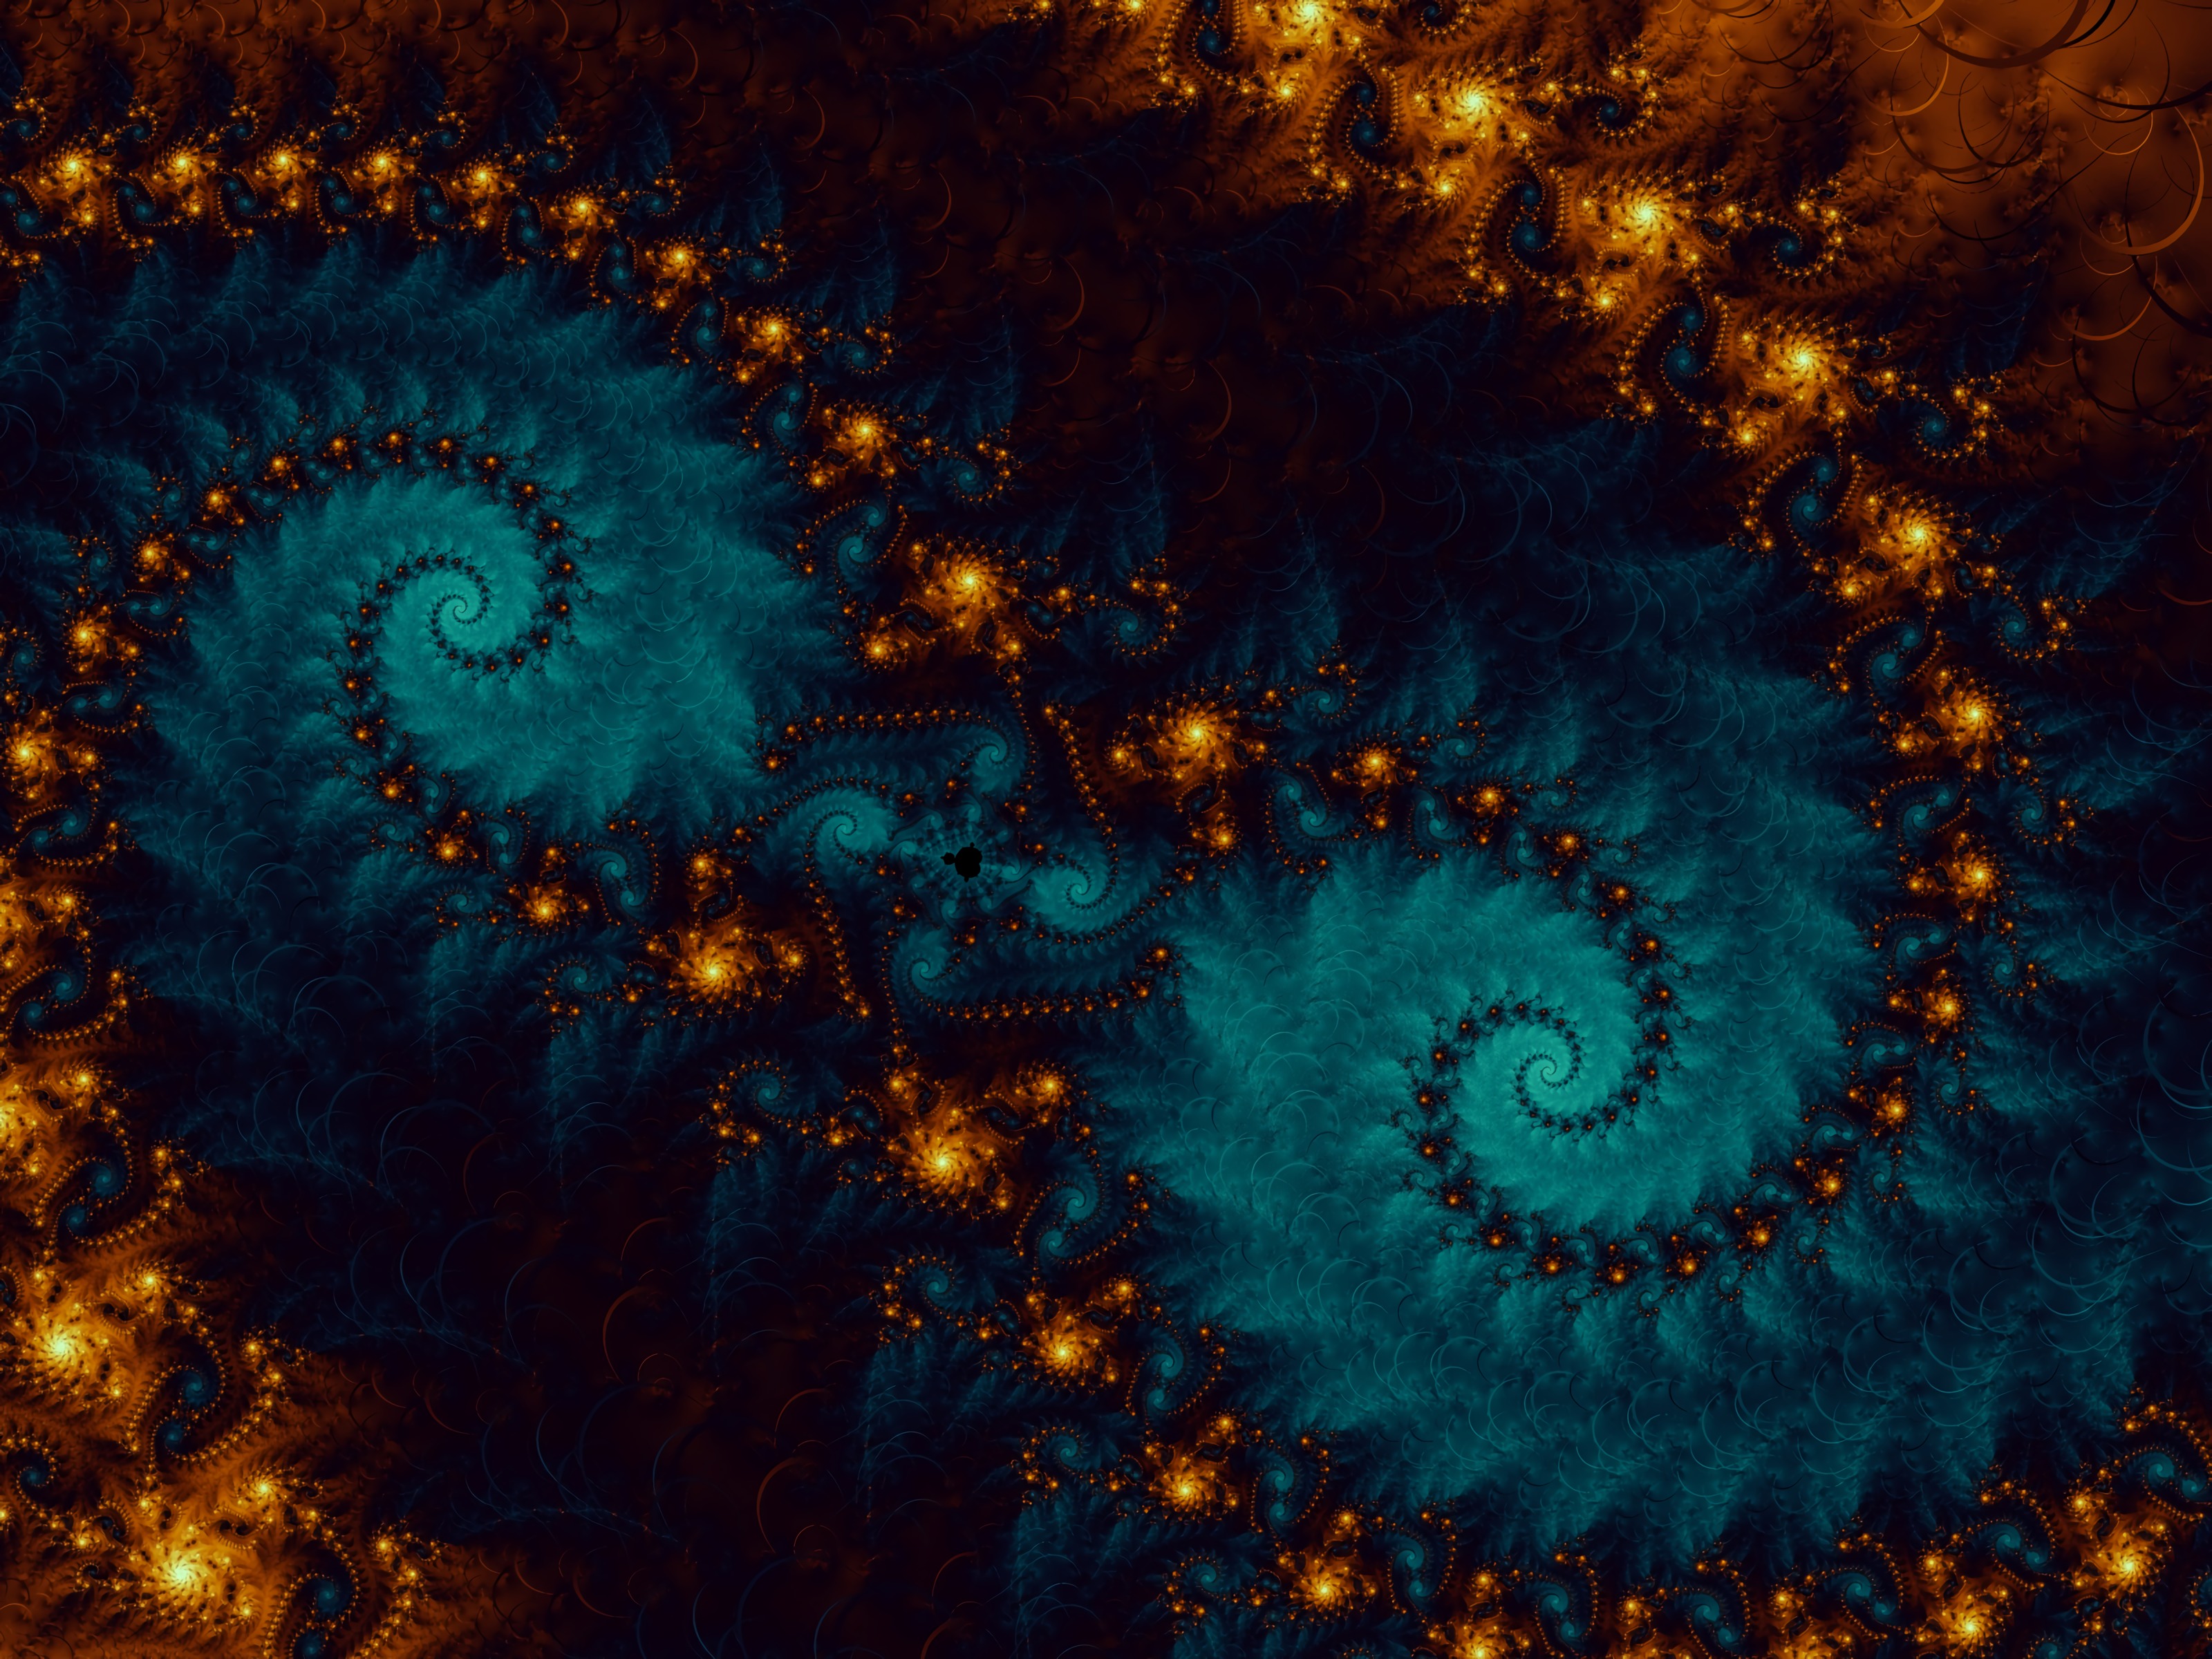 fractal, abstract, pattern, spiral, swirling, involute download HD wallpaper